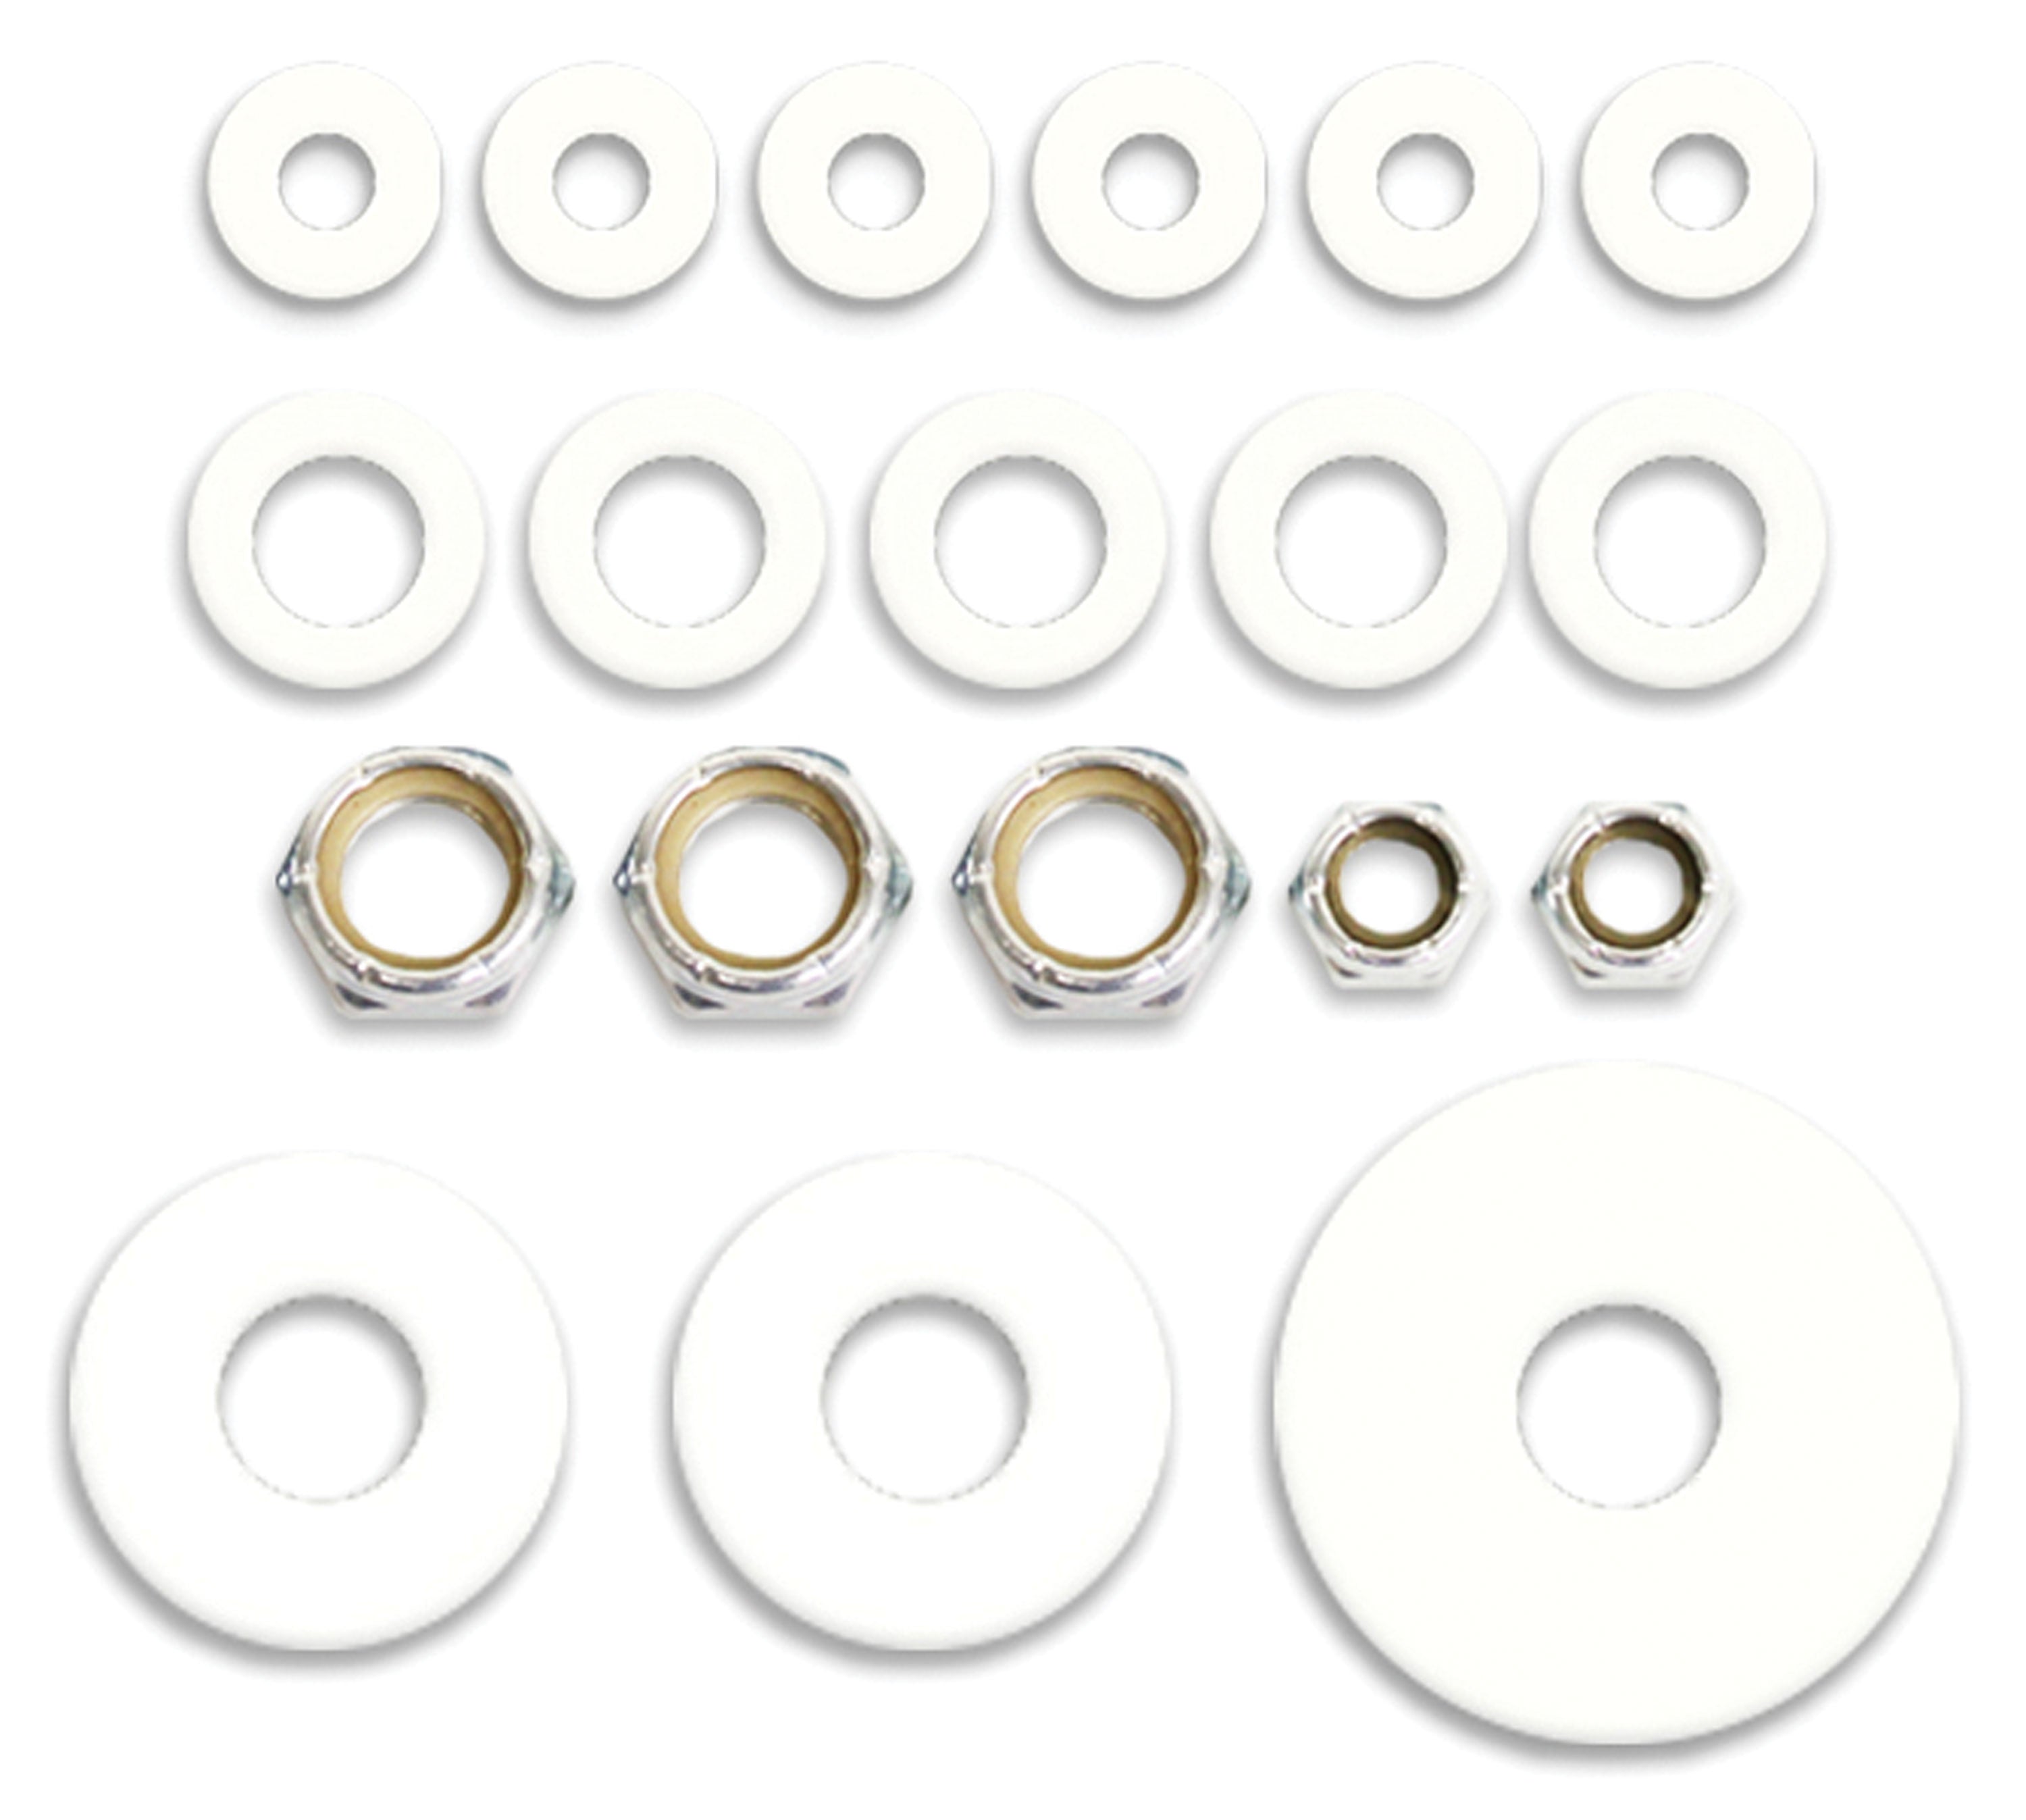 Blue Ox BX88382 Replacement Washer Kit for Blue Ox Tow Bars (Replaces 84-0089)